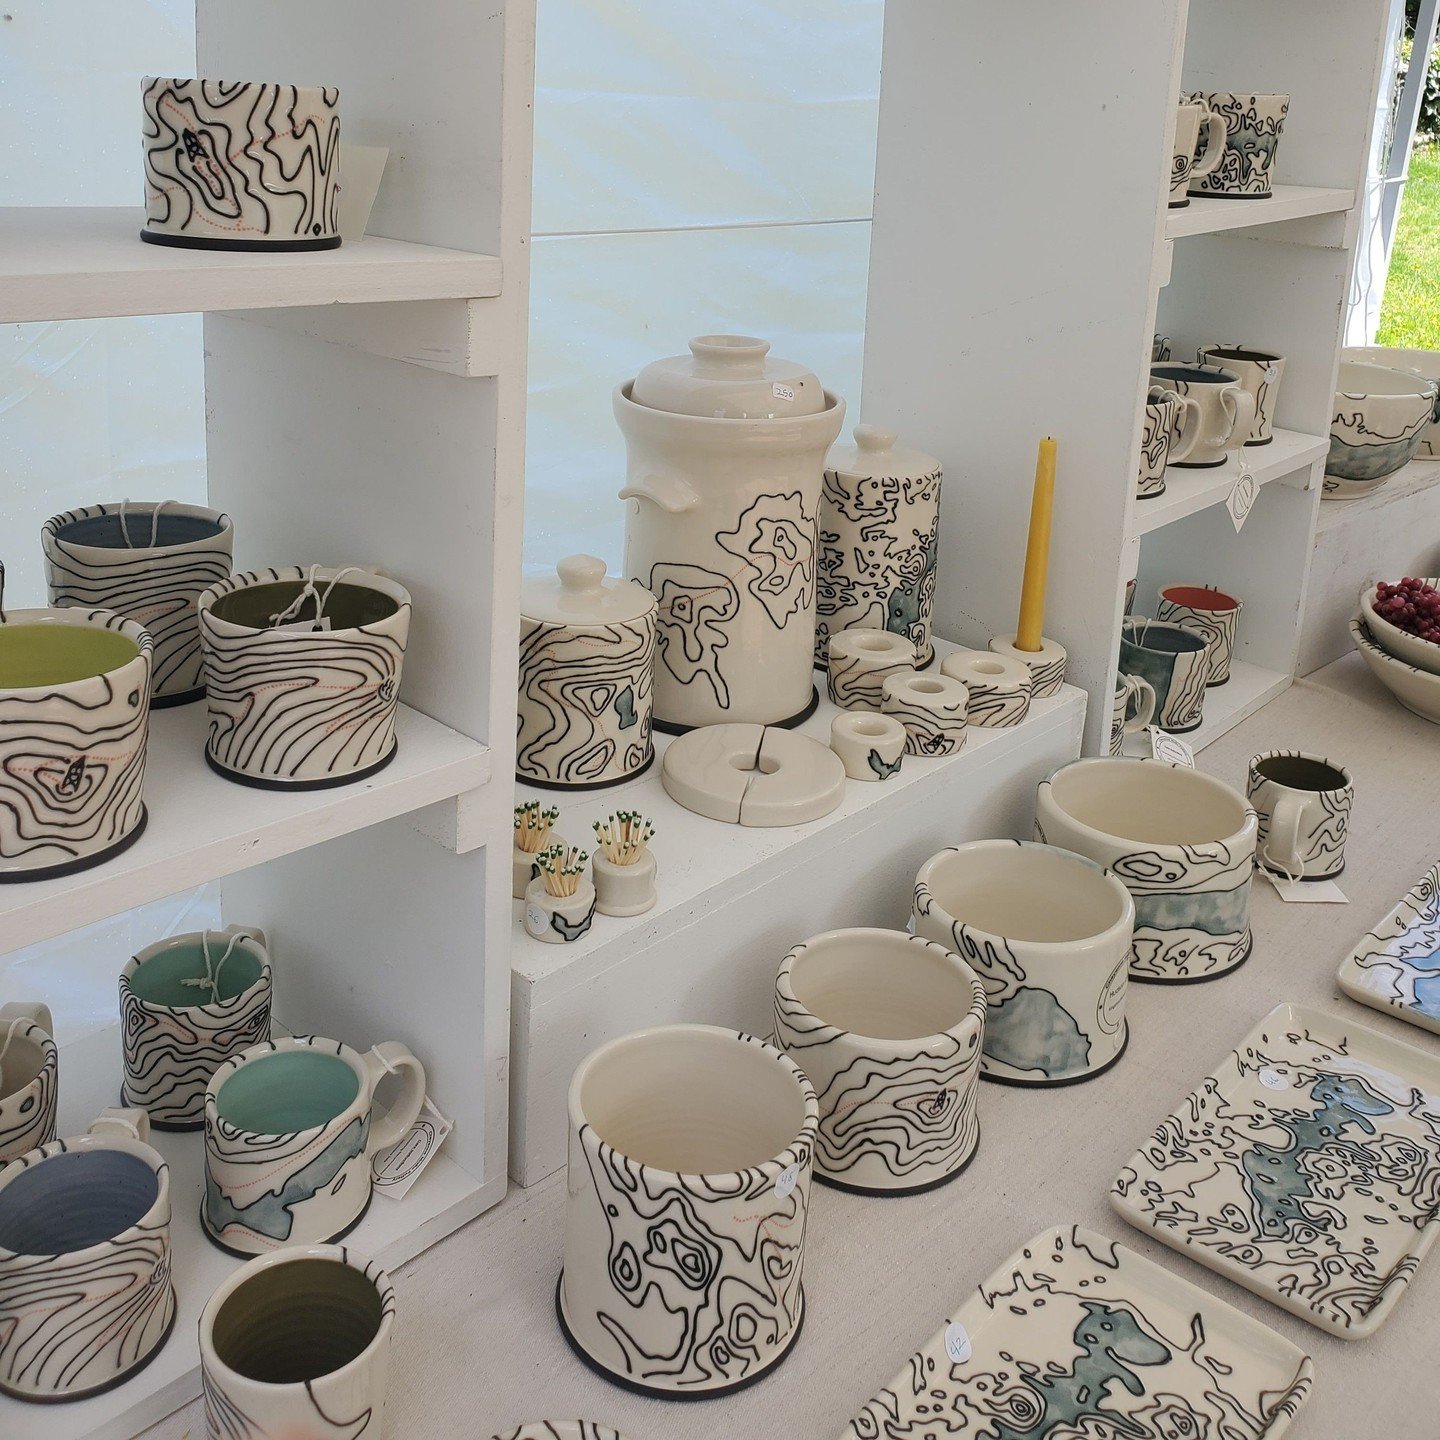 Cheyenne Mallo and Zac Schiff of Cheyenne Mallo Pottery are back for the Spring Craft Crawl at the Maple Street stop in Croton! Their functional pottery is intended for everyday use and features map imagery of mountains, hiking trails, lakes and rive